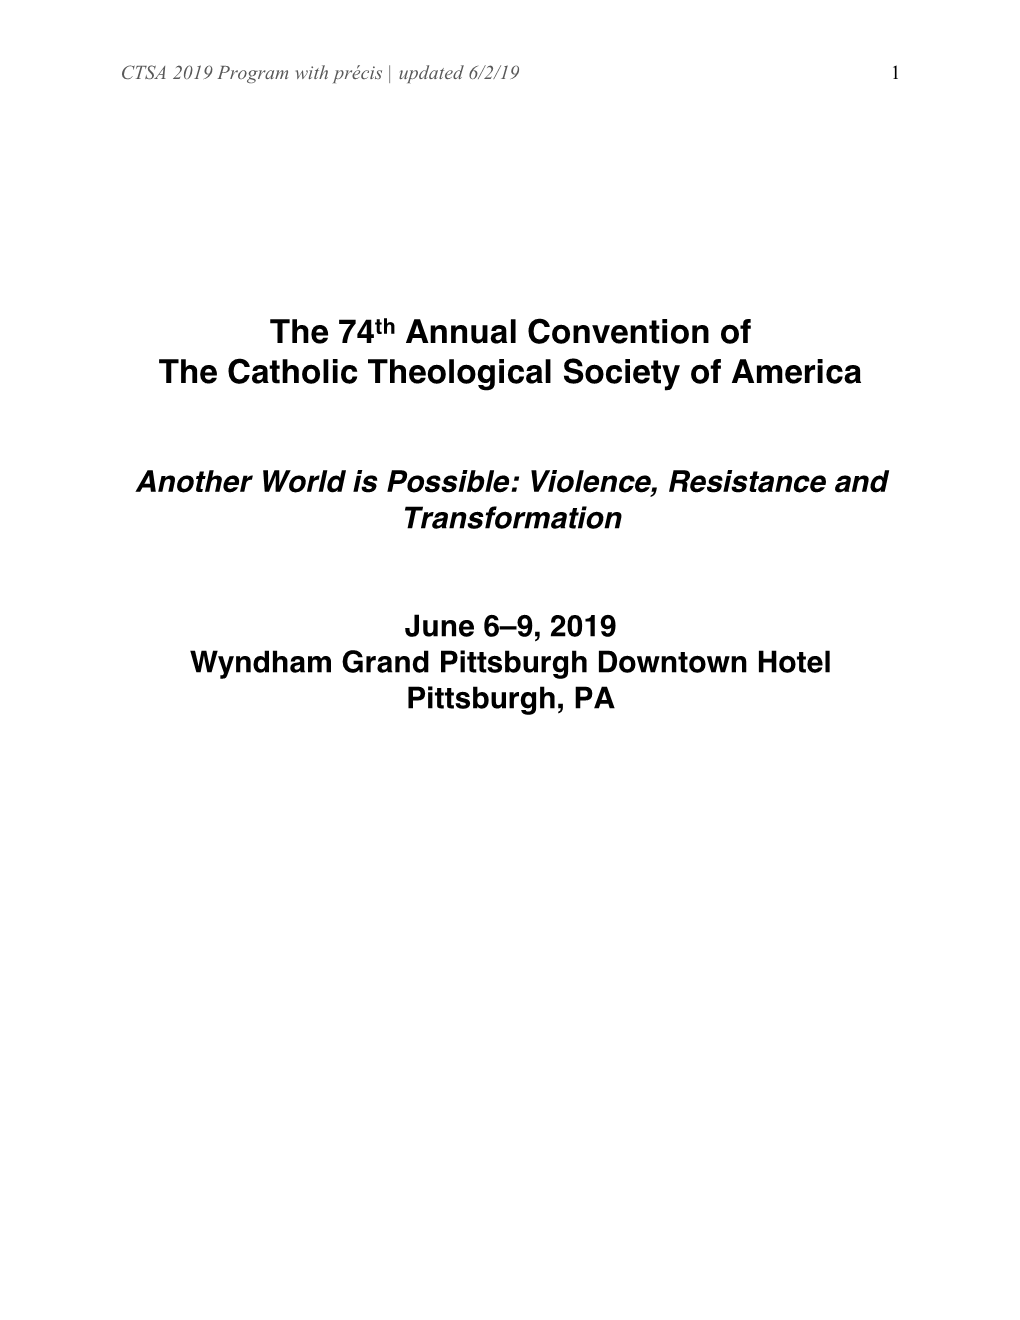 The 74Th Annual Convention of the Catholic Theological Society of America